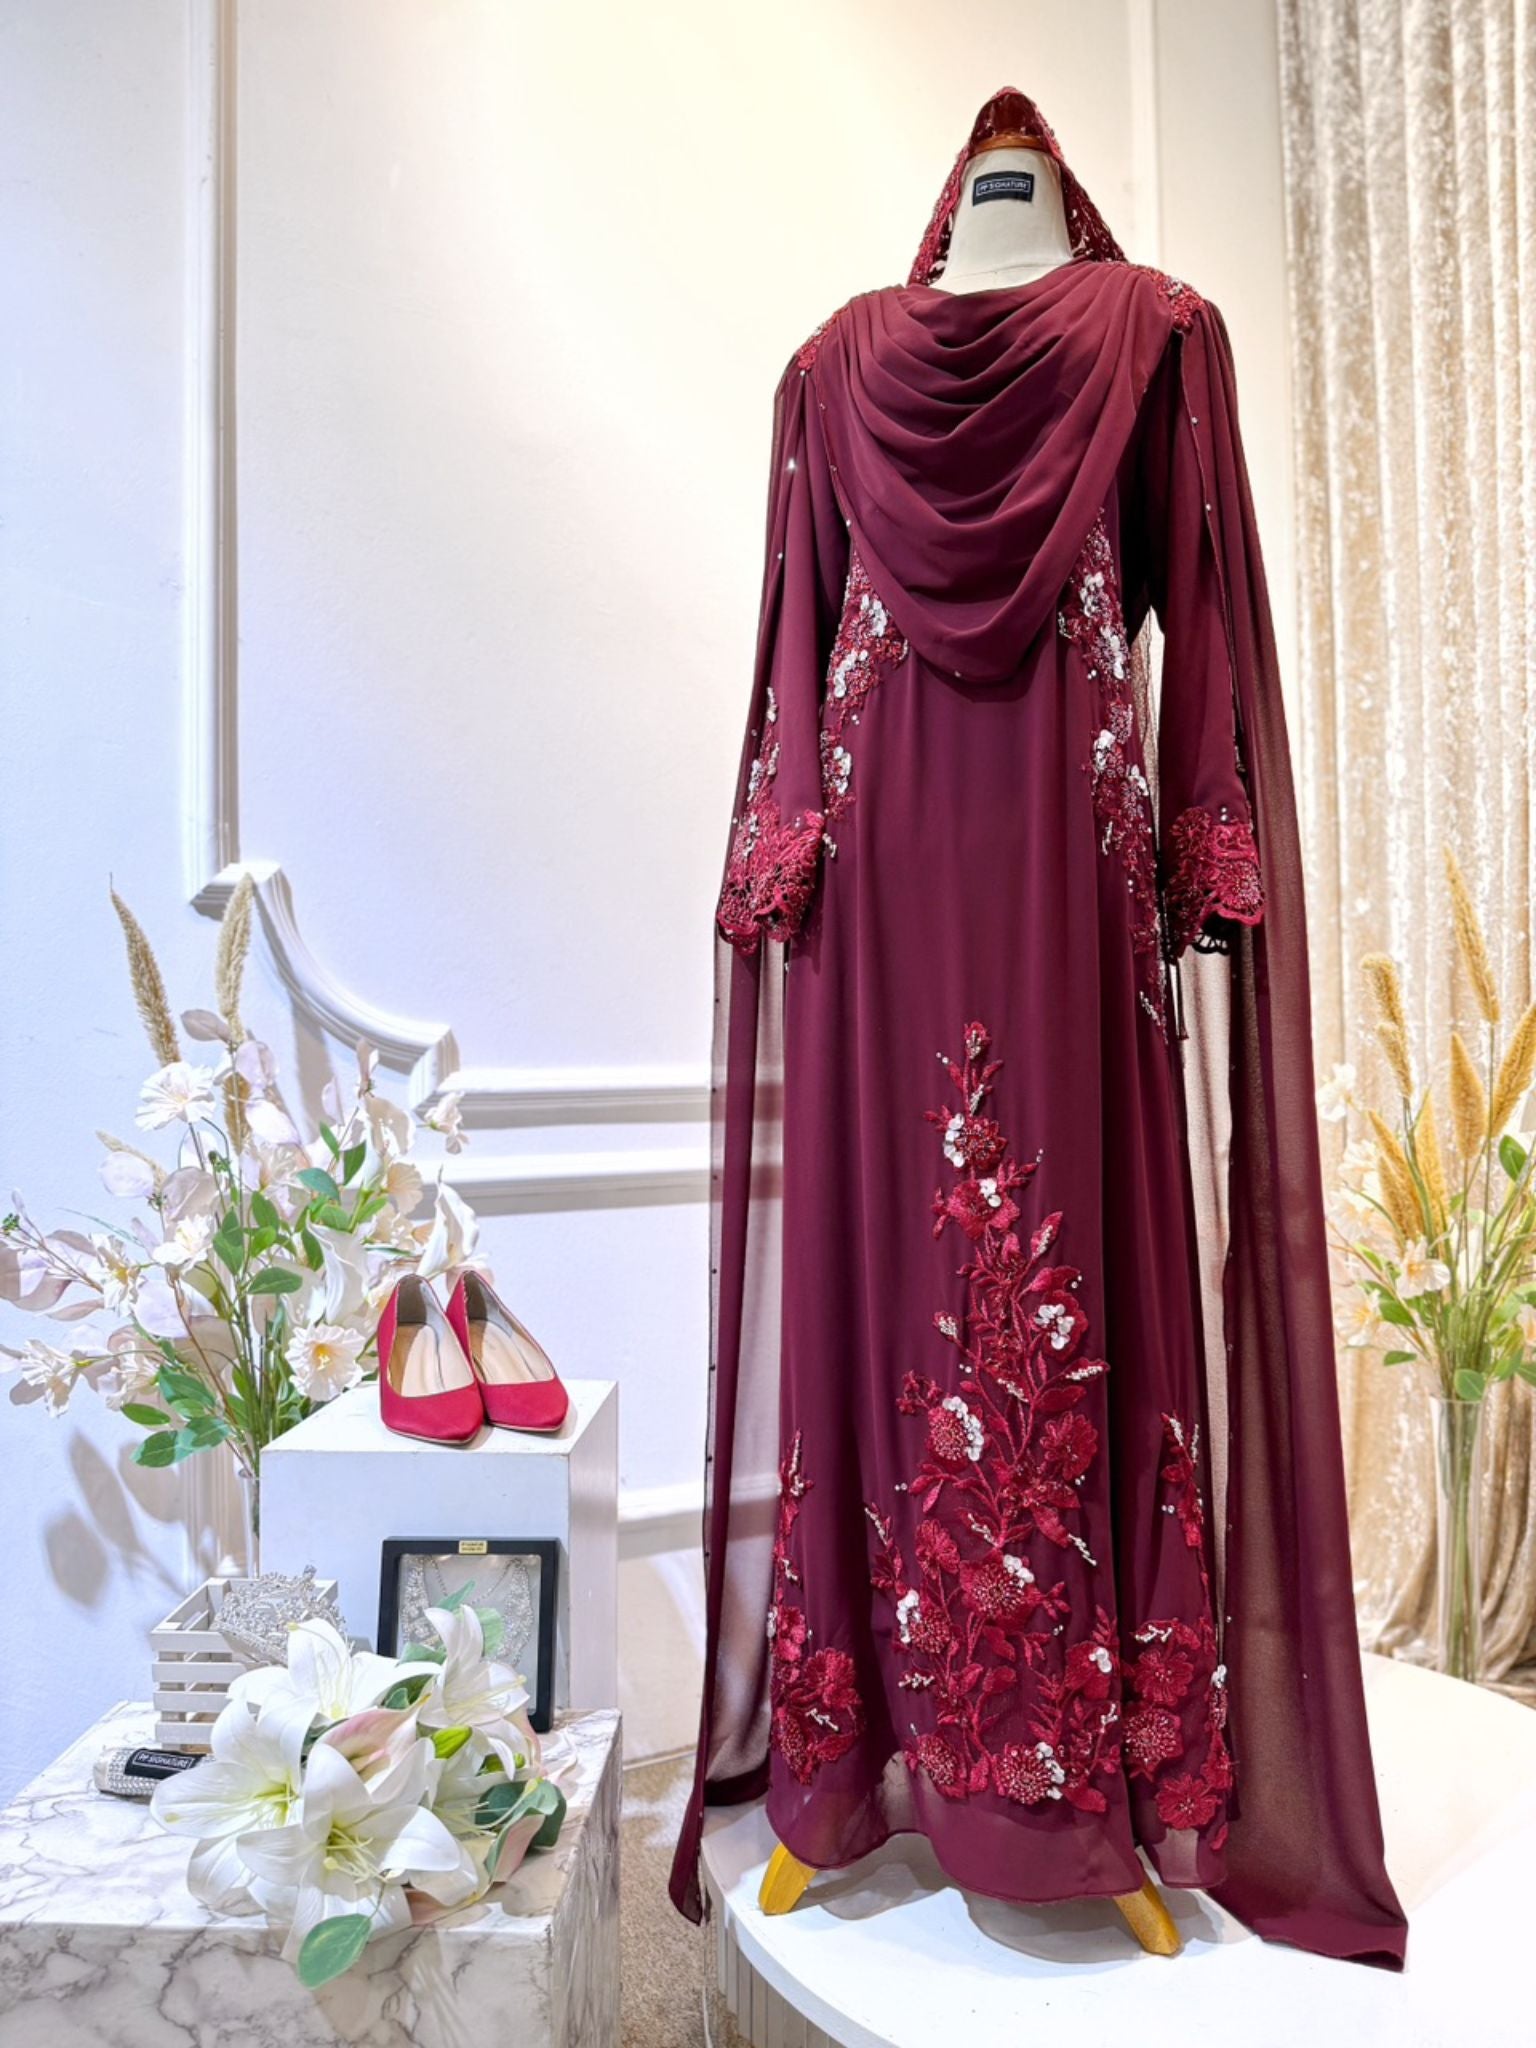 WARDINA offers a captivating Baju Pengantin ensemble in Maroon Burgundy, tailored for your wedding reception (Baju Sanding). The bride's attire features a graceful loose dress with an elegant shoulder cape, while grooms can choose between the classic Prince Suit or the traditional Kot Raihan 3-piece set. Crafted from luxurious chiffon material, this ensemble epitomizes sophistication and style, ensuring a memorable presence for both bride and groom on their special day.